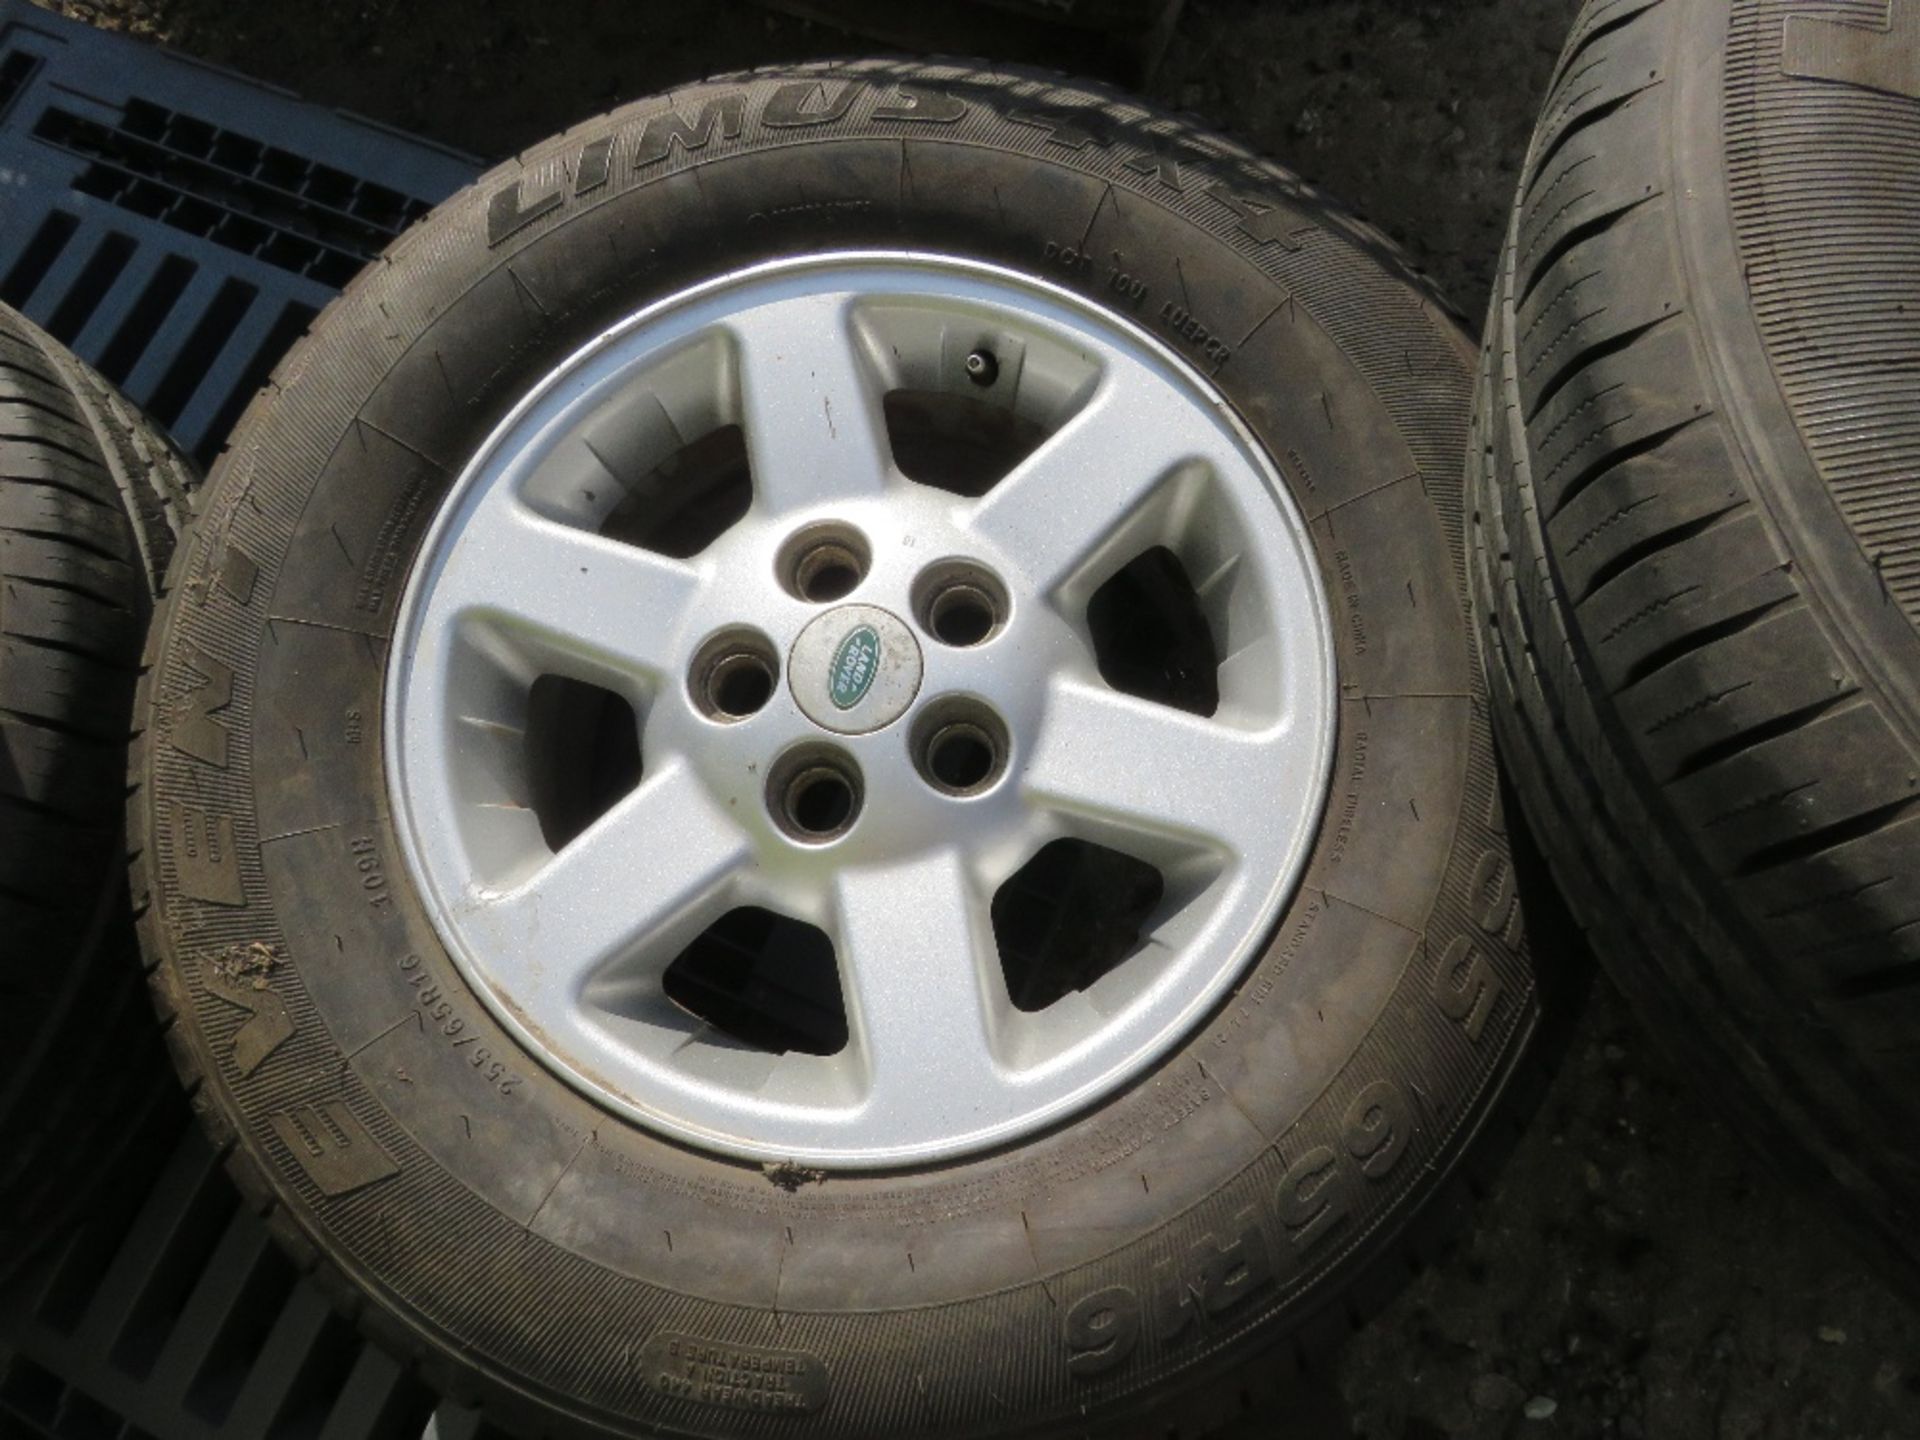 4 X LANDROVER 255-65R16 ALLOY WHEELS AND TYRES PLUS 2 OTHER 16" TYRES. THIS LOT IS SOLD UNDER THE - Image 6 of 7